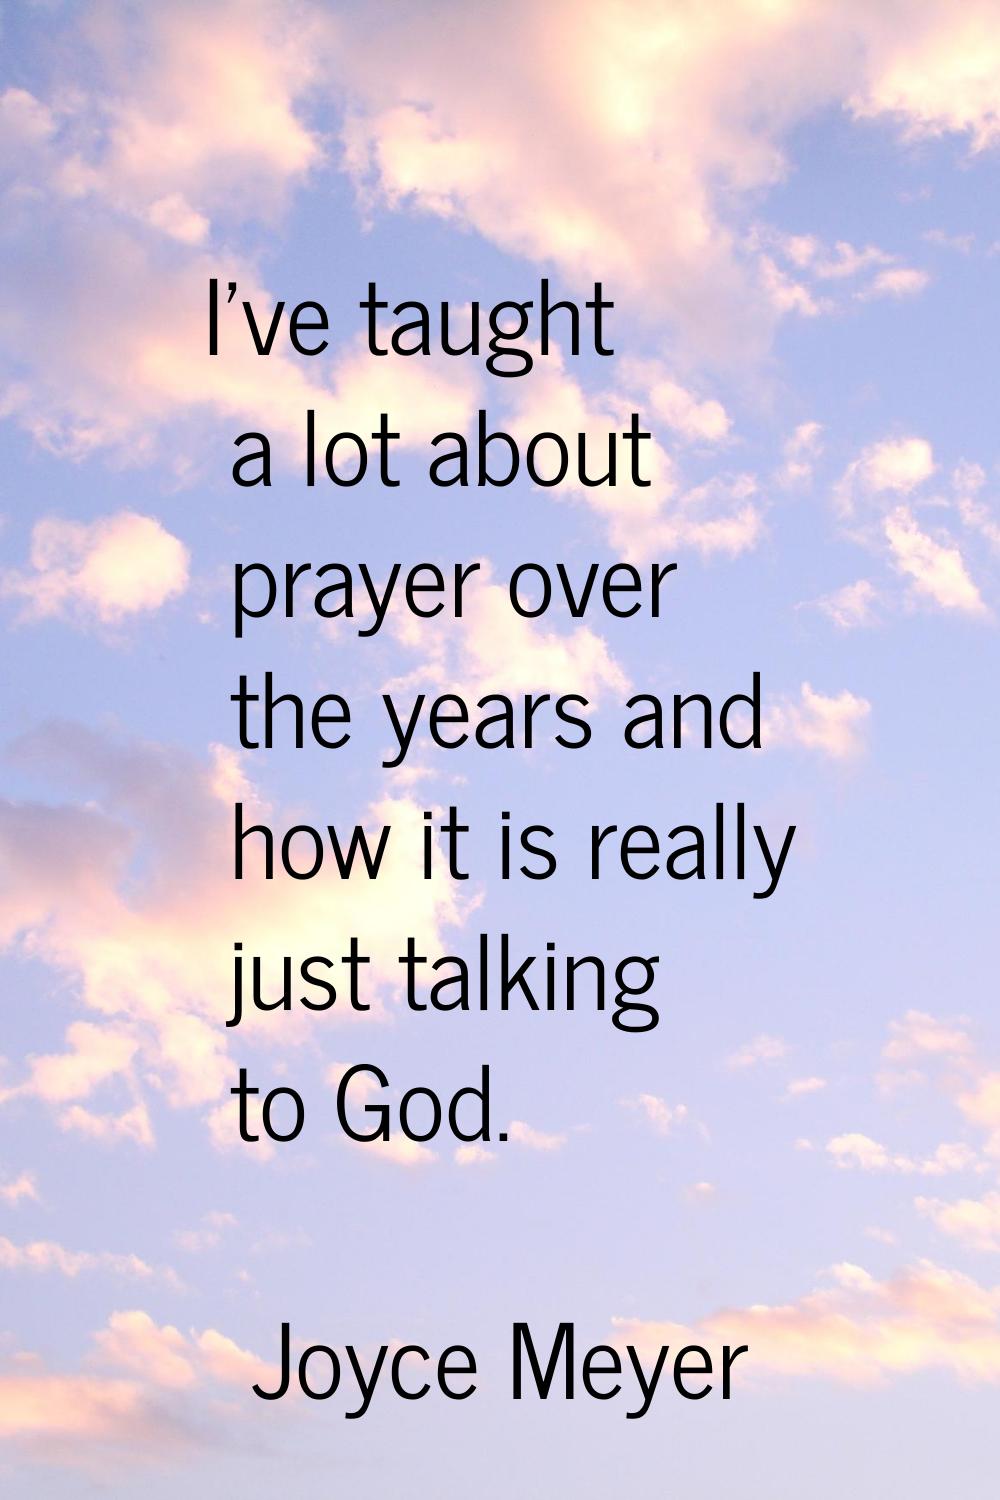 I've taught a lot about prayer over the years and how it is really just talking to God.